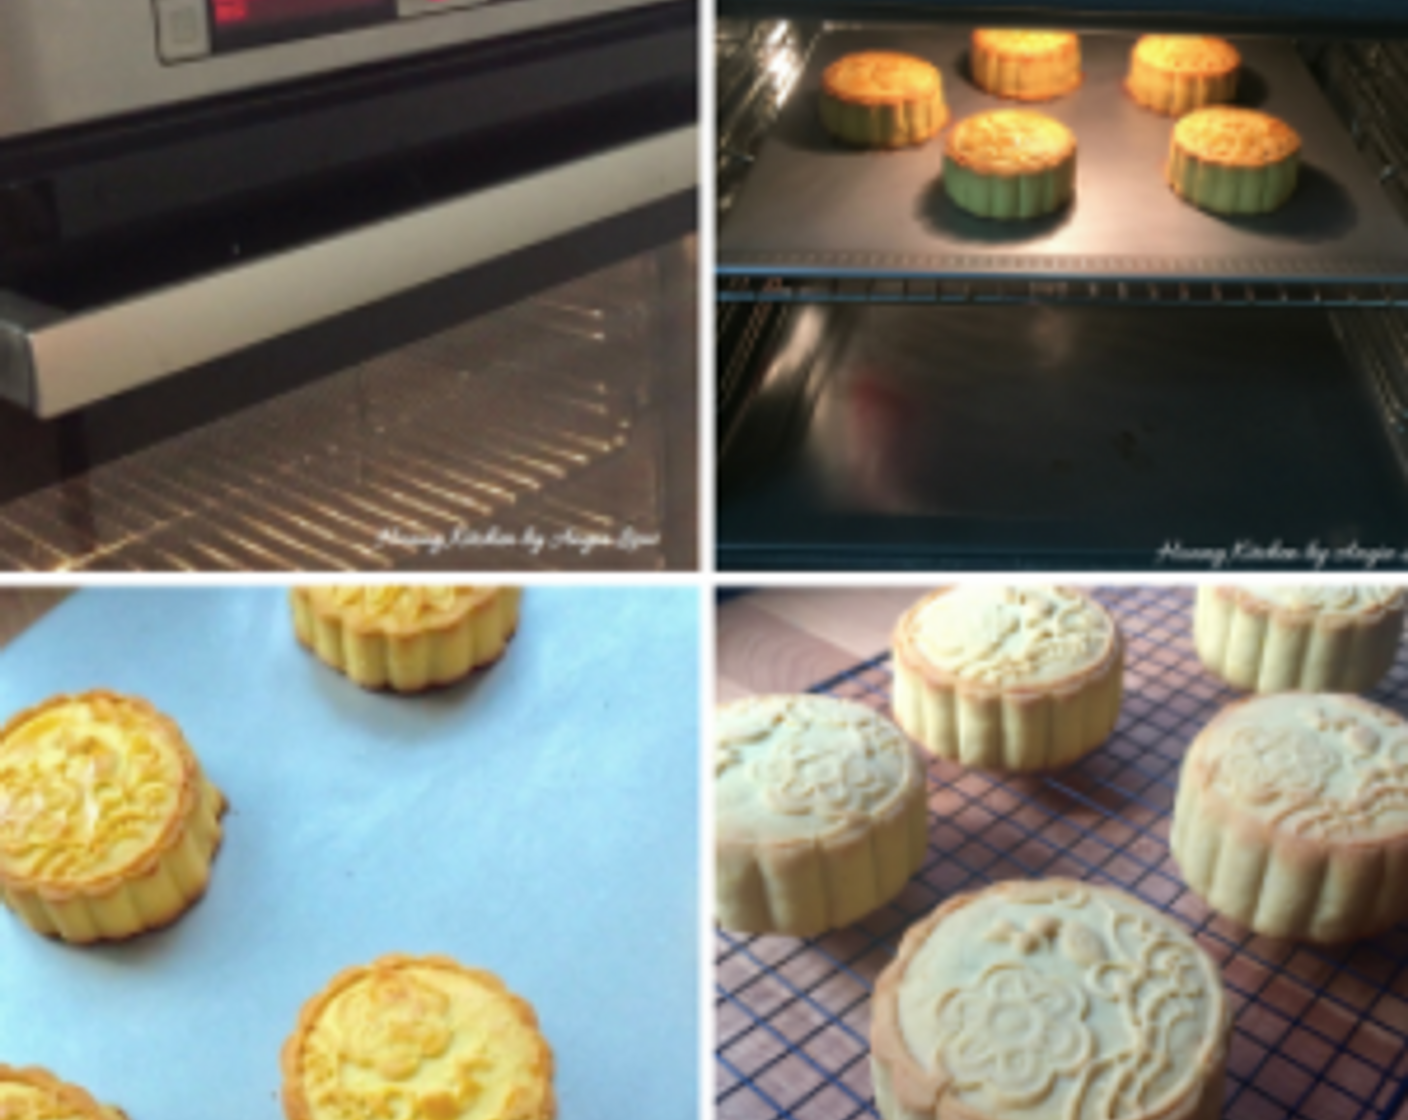 step 12 Meanwhile, preheat oven to 190 degree C (375 degrees F). Place mooncakes into the preheated oven to bake for 20 to 25 minutes, or until golden brown in colour. Then remove and transfer the baked mooncakes to cool completely on wire rack.